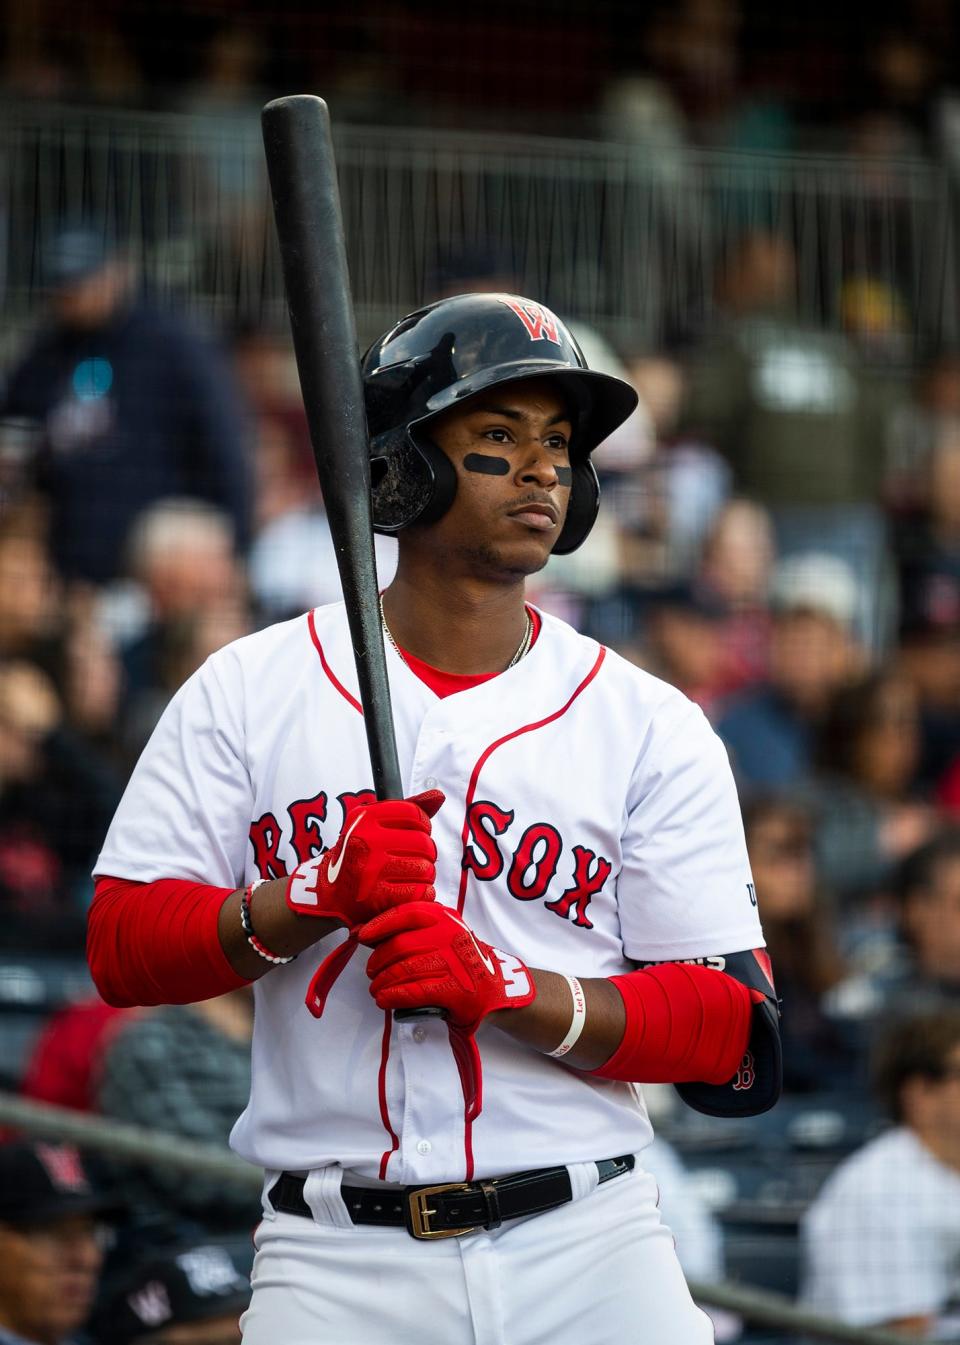 "All that matters is winning and impacting the team in any way, shape, or form,” said Jeter Downs, who recently completed his first stint with the Boston Red Sox.